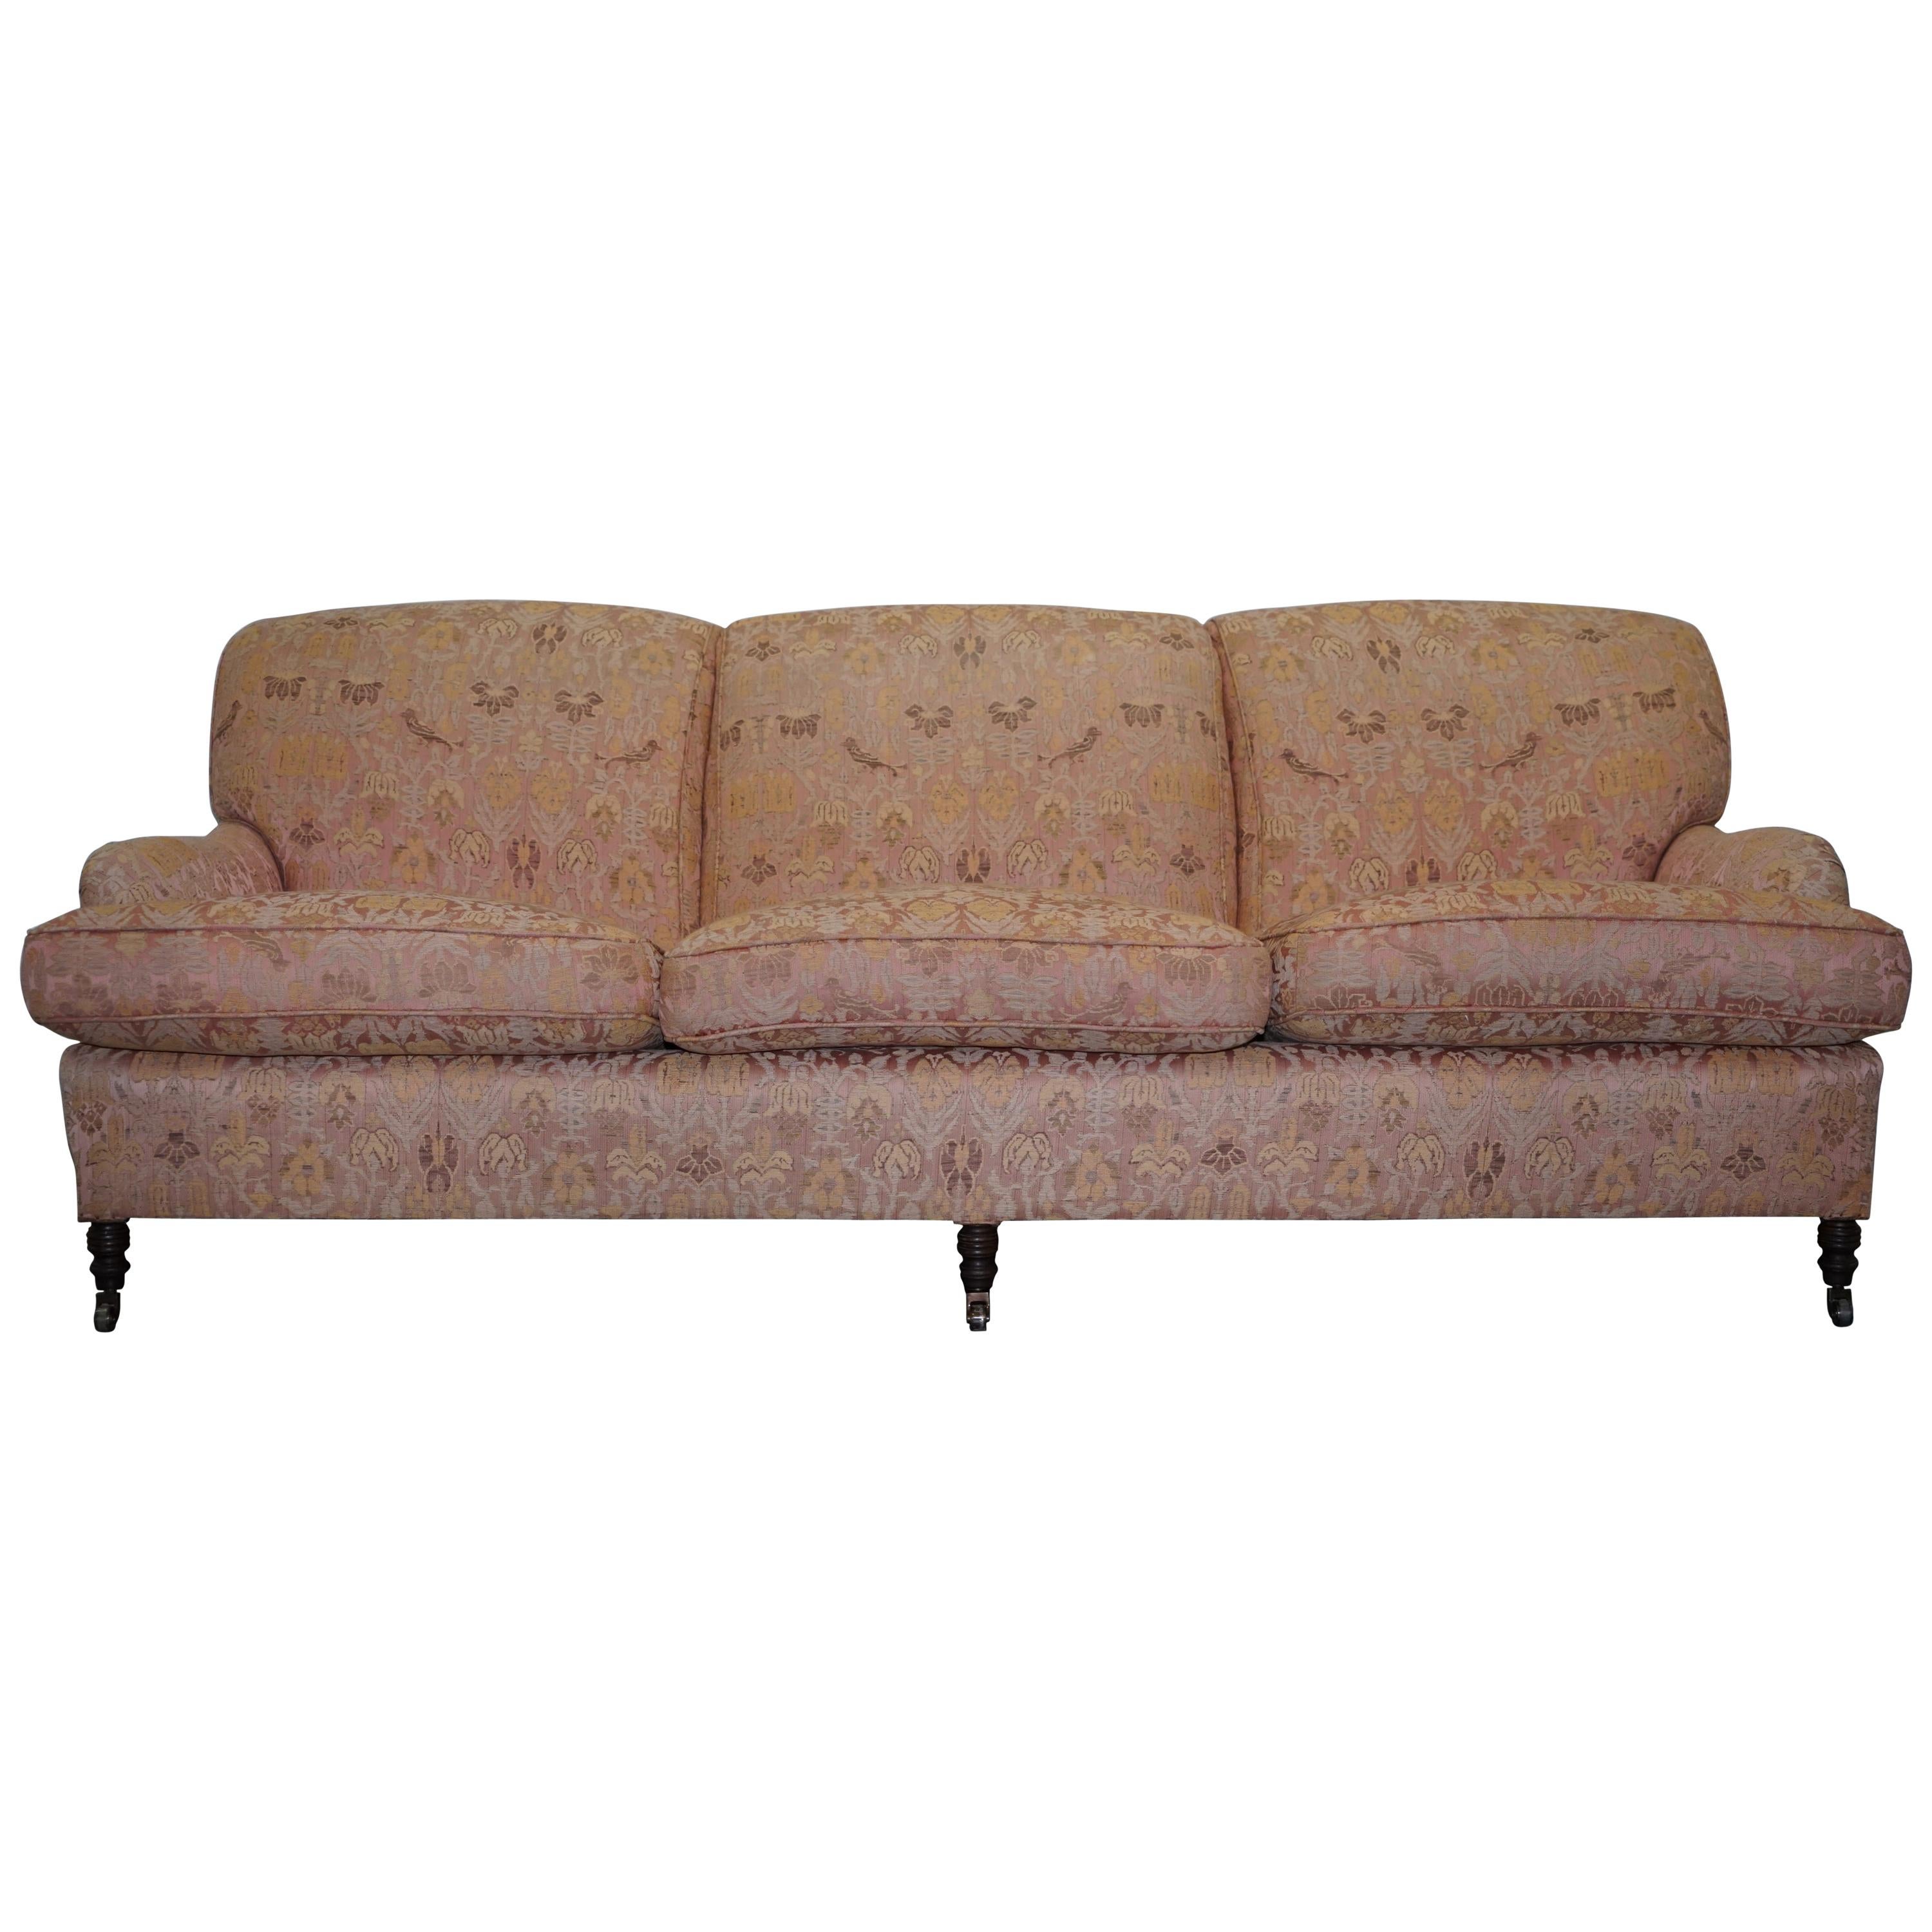 1 of 2 George Smith Scroll Arm Three-Seat Sofas Embroidered Fabric